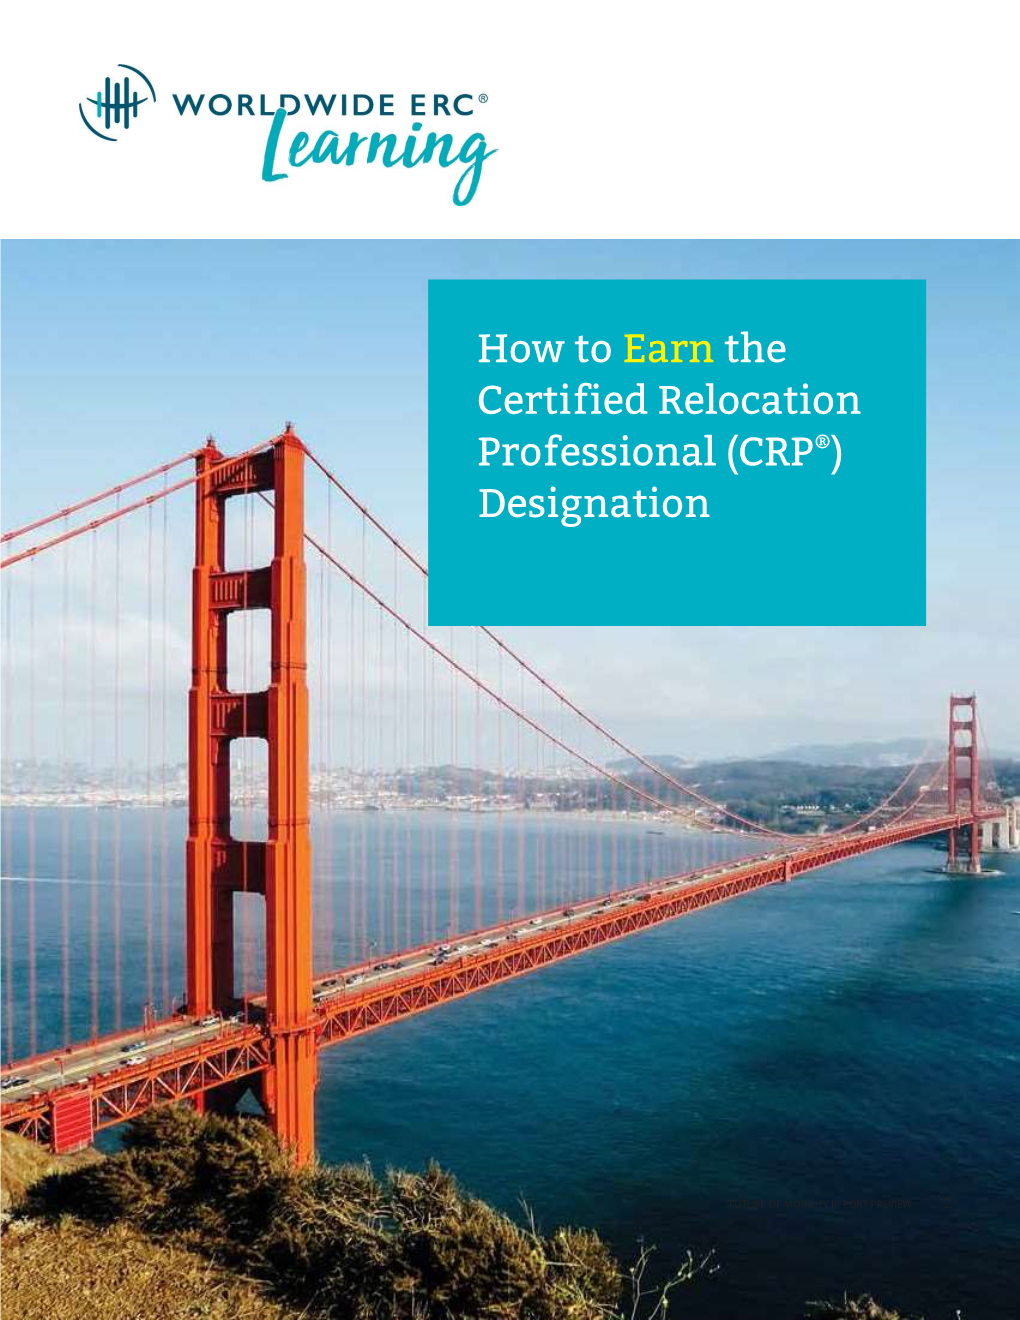 How to Earn the Certified Relocation Professional (CRP®) Designation